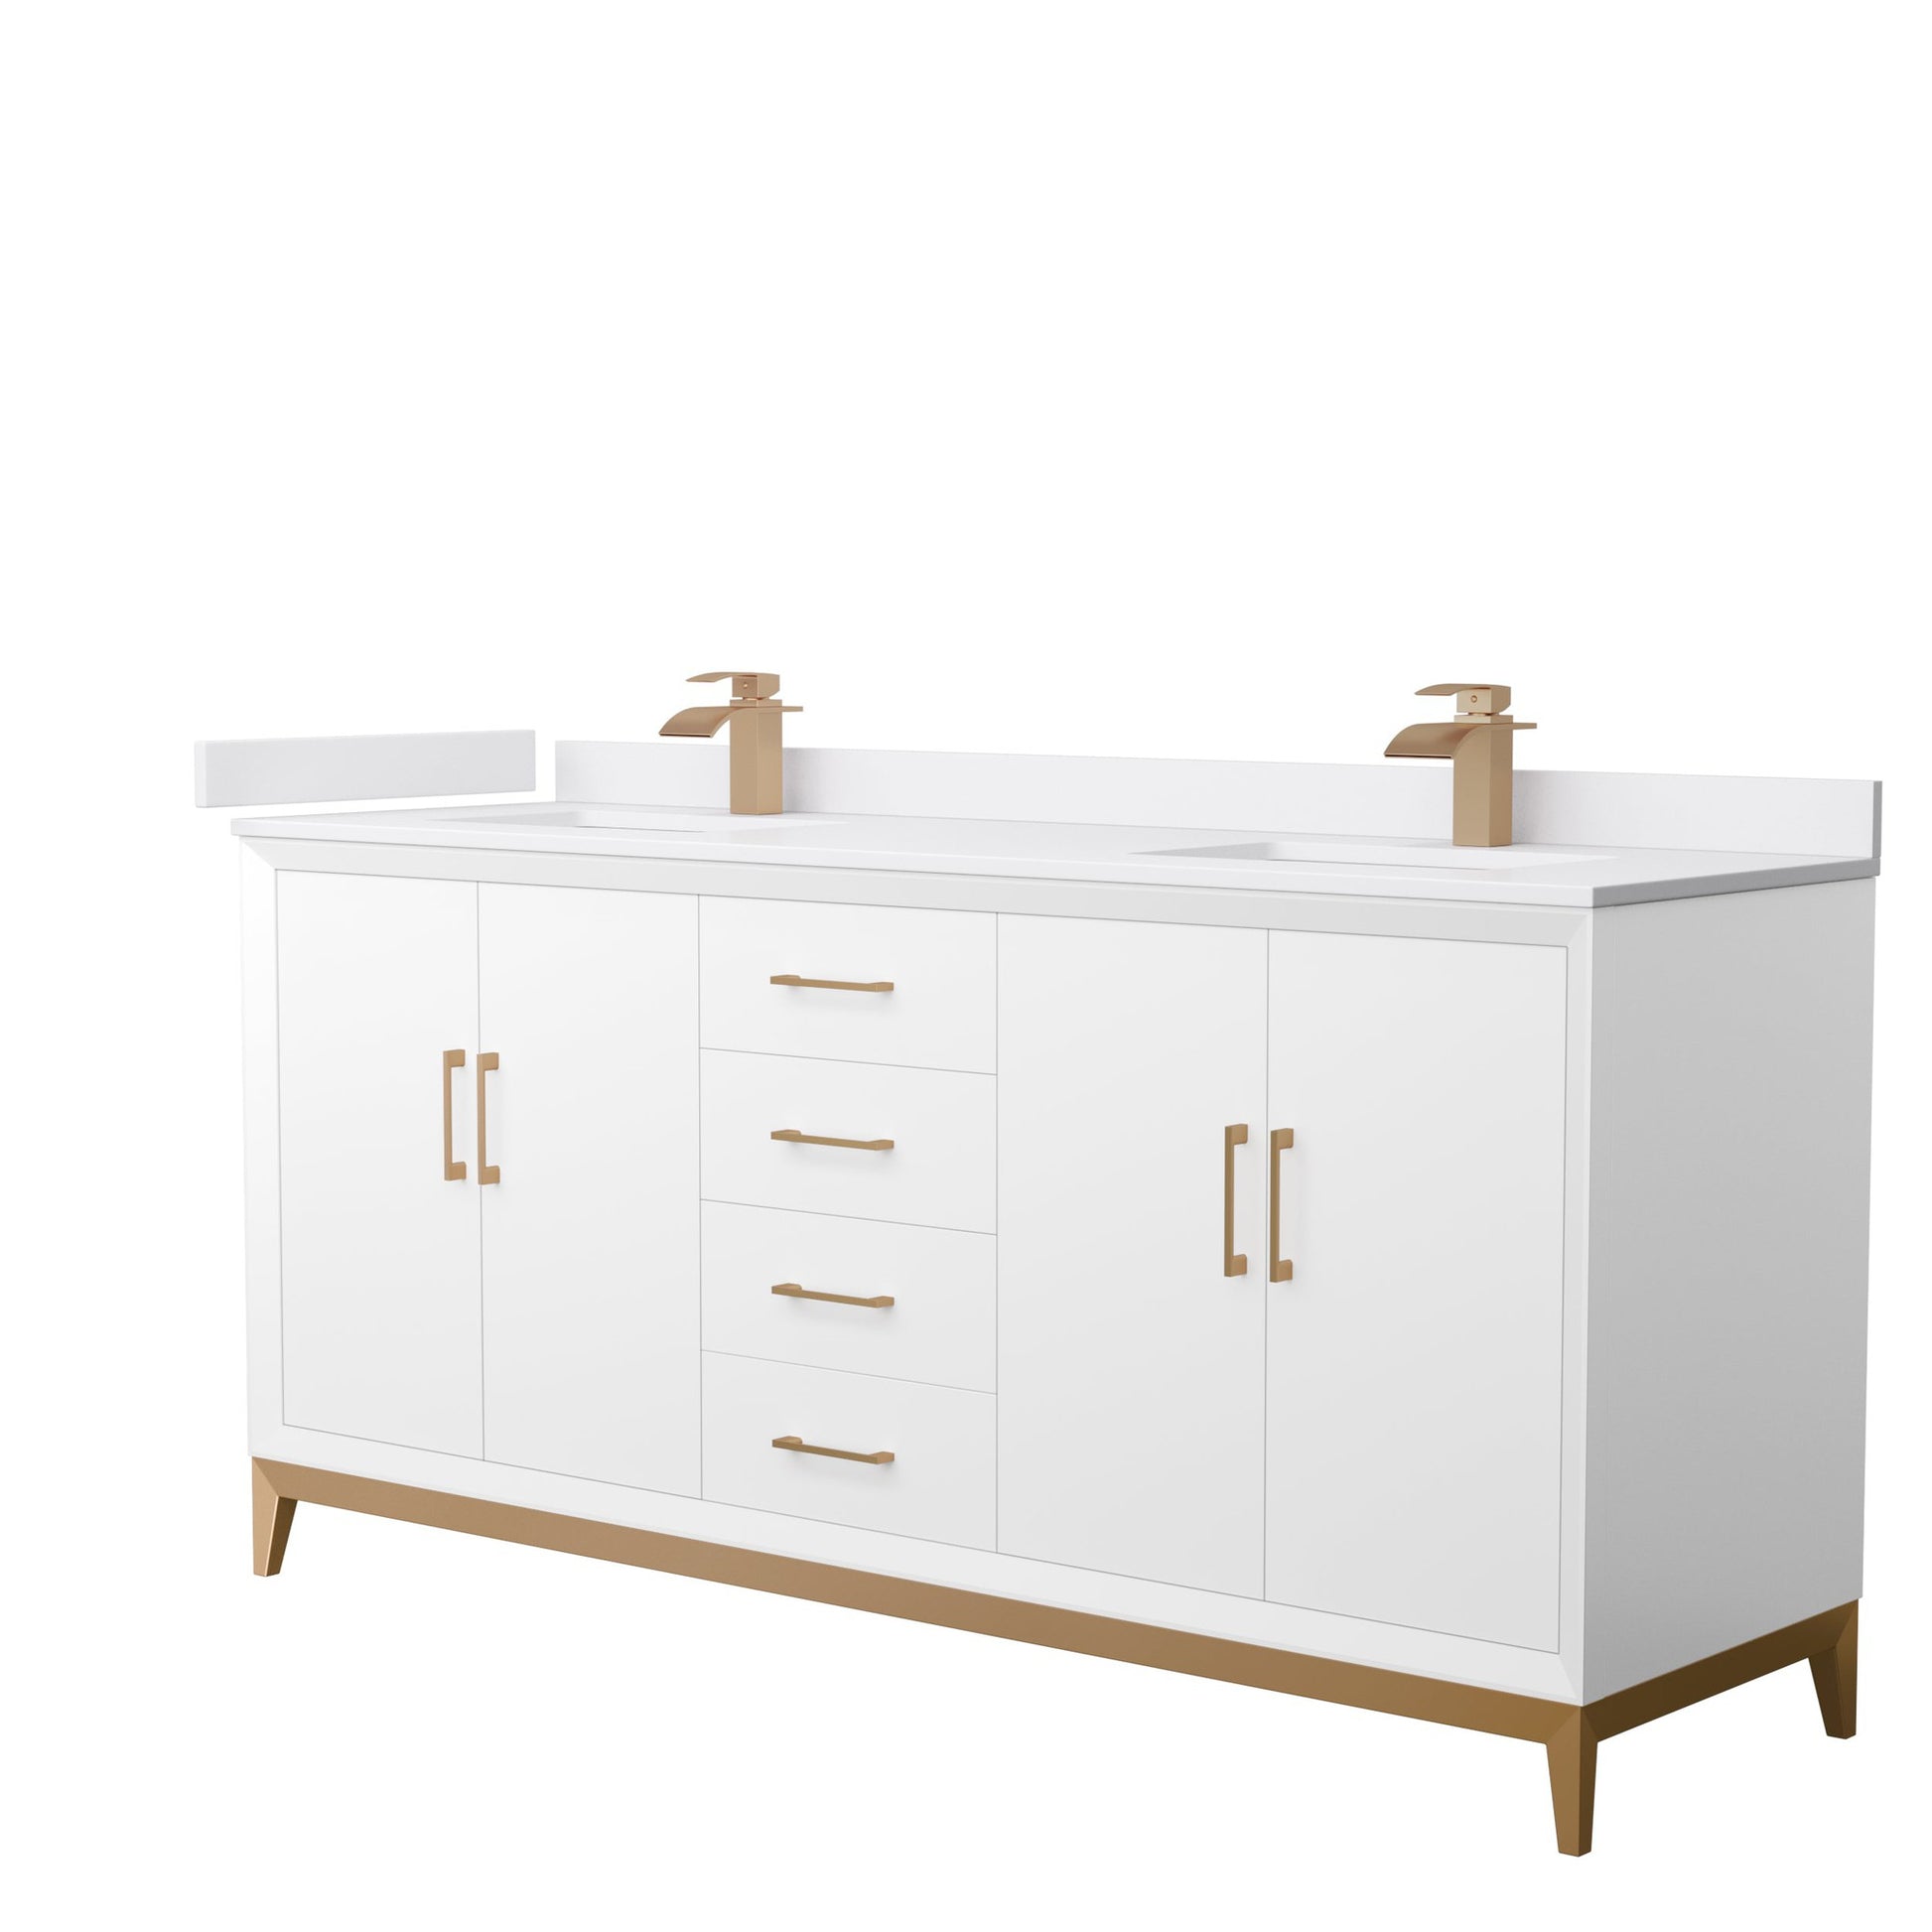 Wyndham Collection Amici 72" Double Bathroom Vanity in White, White Cultured Marble Countertop, Undermount Square Sinks, Satin Bronze Trim